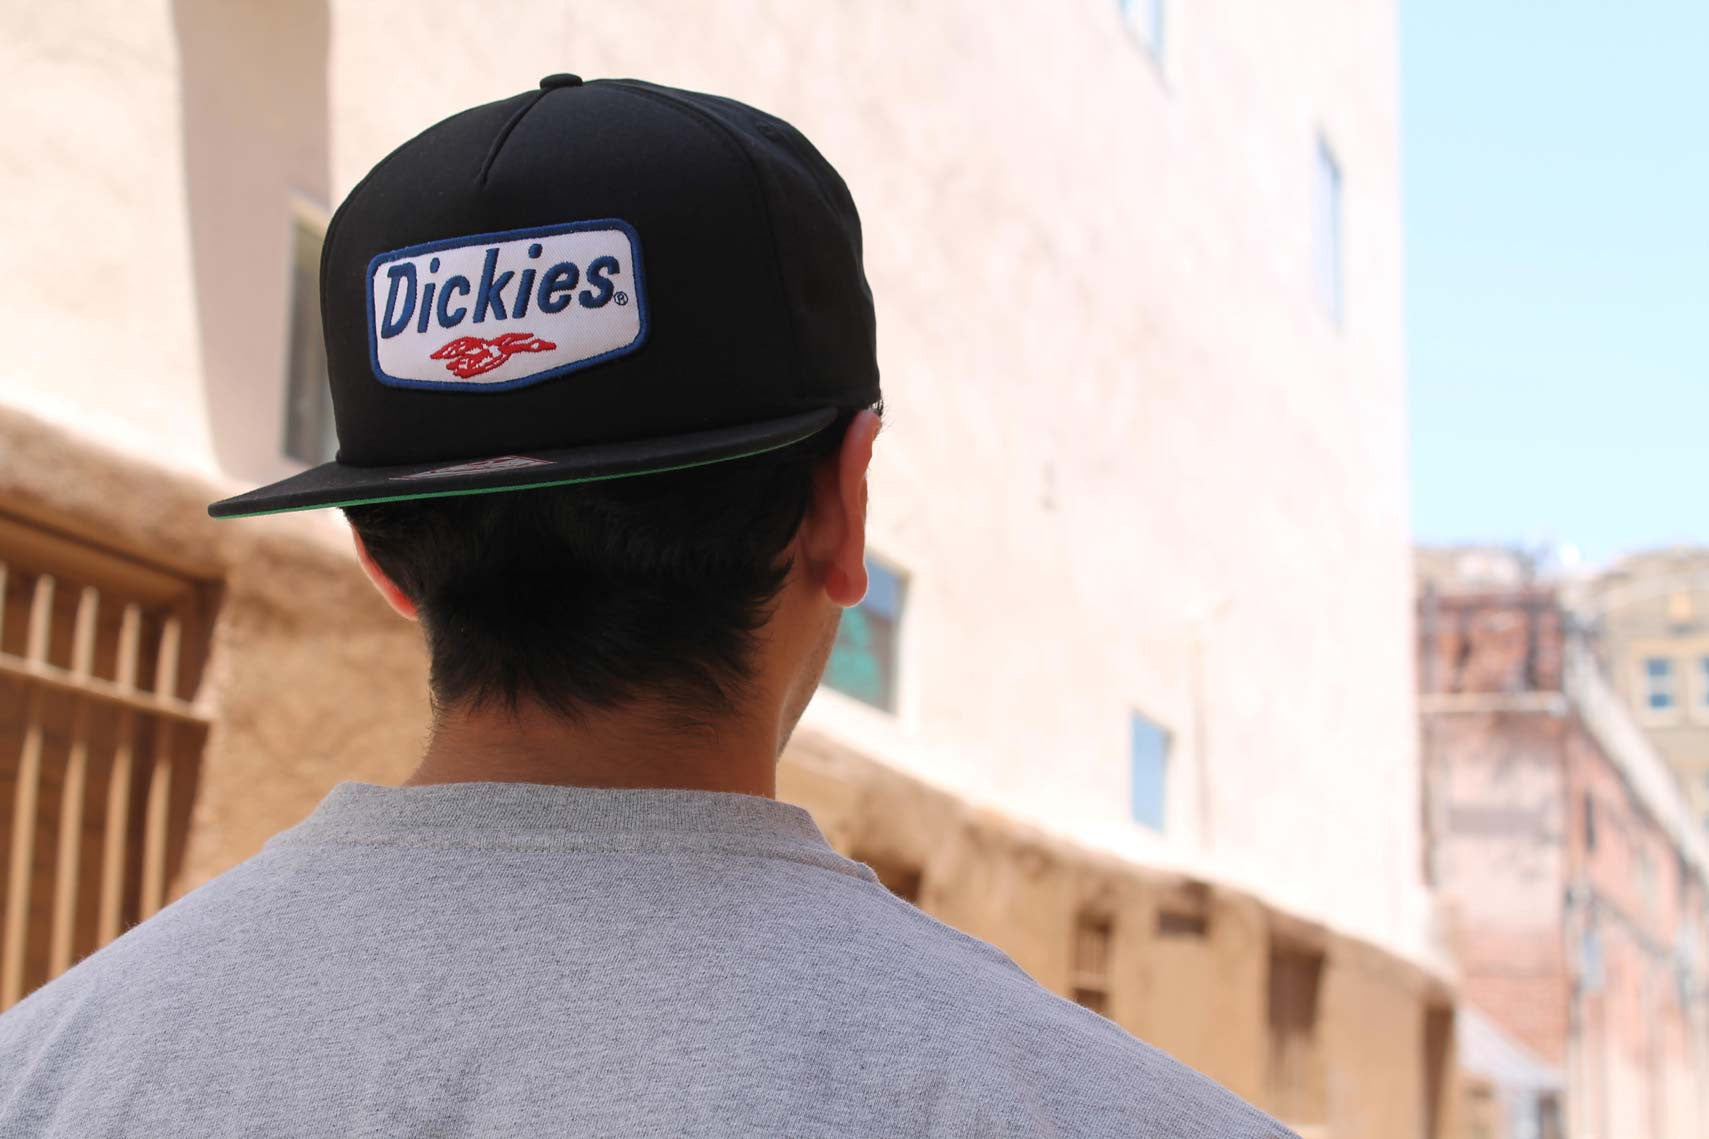 Dickies hat on a guy in an alley 